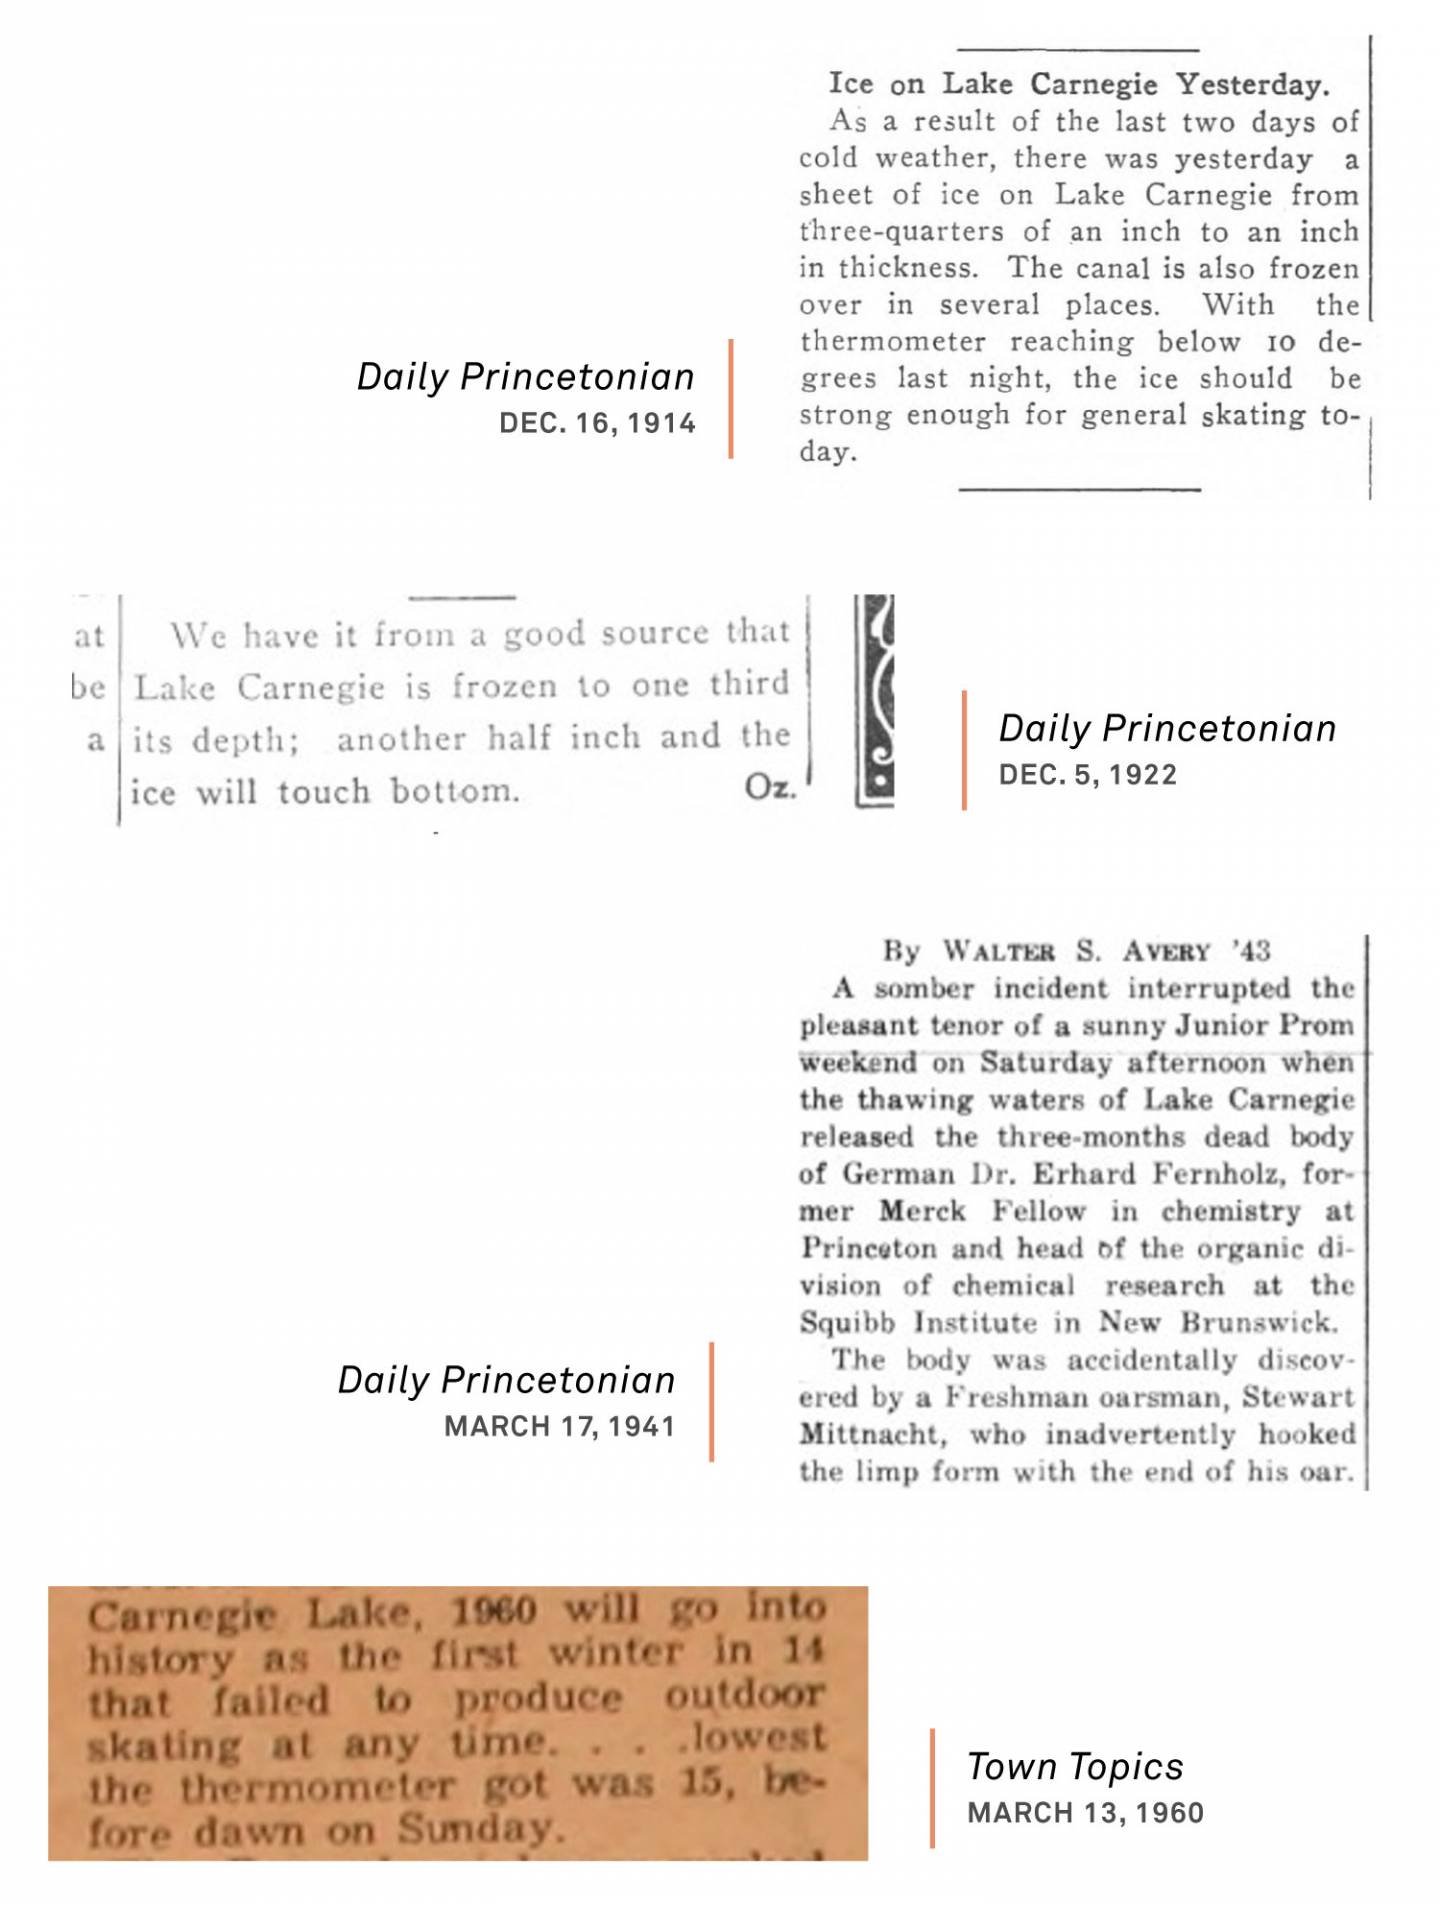 4 clippings from the Daily Princetonian and Town Topics about the freezing of Lake Carnegie. From Daily Princetonian, Dec. 16, 1914: "Ice on Lake Carnegie Yesterday. As a result of the last 2 days of cold weather, there was yesterday a sheet of ice on Lake Carnegie from 3/4 of an inch to an inch in thickness. The canal is also frozen over in several places. With the thermometer reaching below 10 degrees last night, the ice should be strong enough for general skating today." Daily Princetonian, Dec. 5, 1922